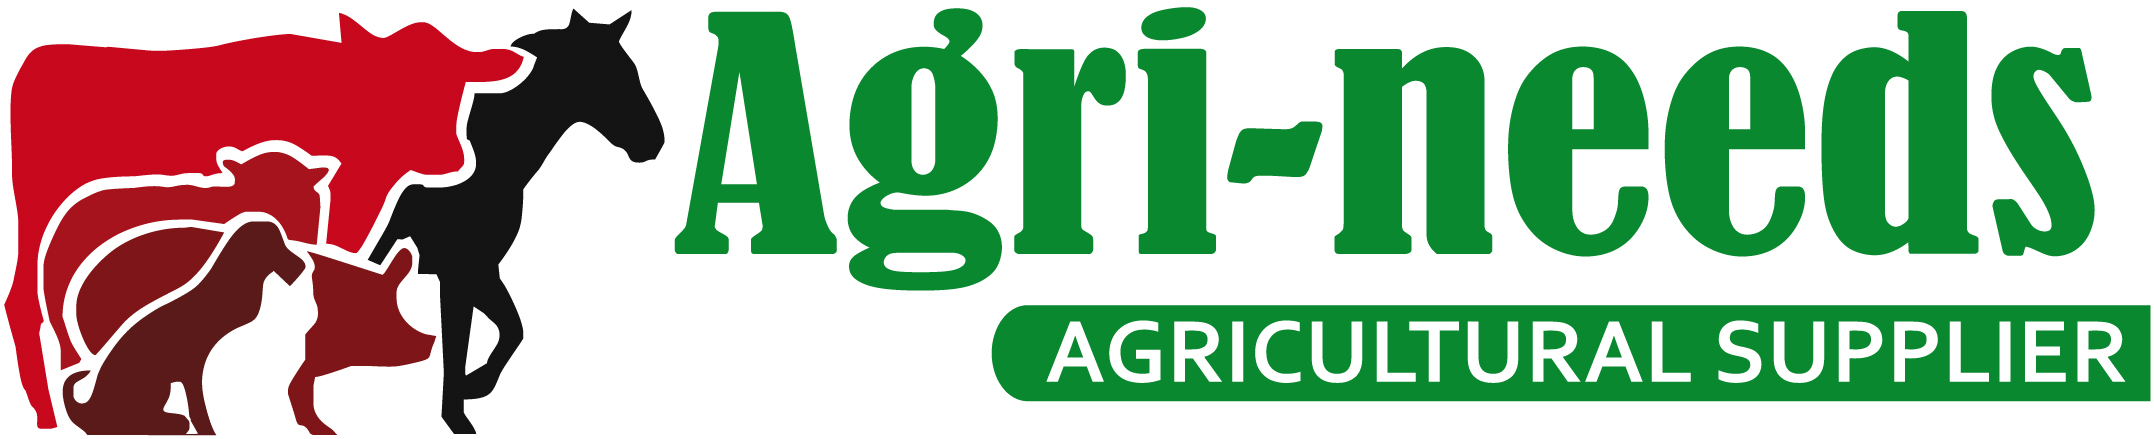 Agrineeds – Irish Agricultural Supplier  | Cattle | Sheep | Farming